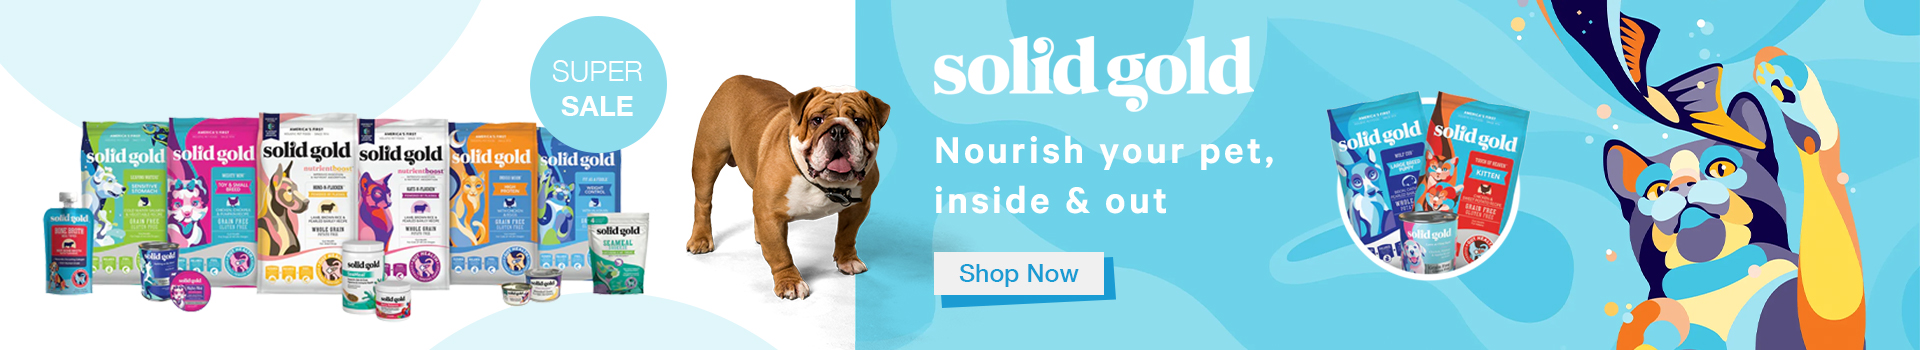 Solid Gold Pet Food Singapore